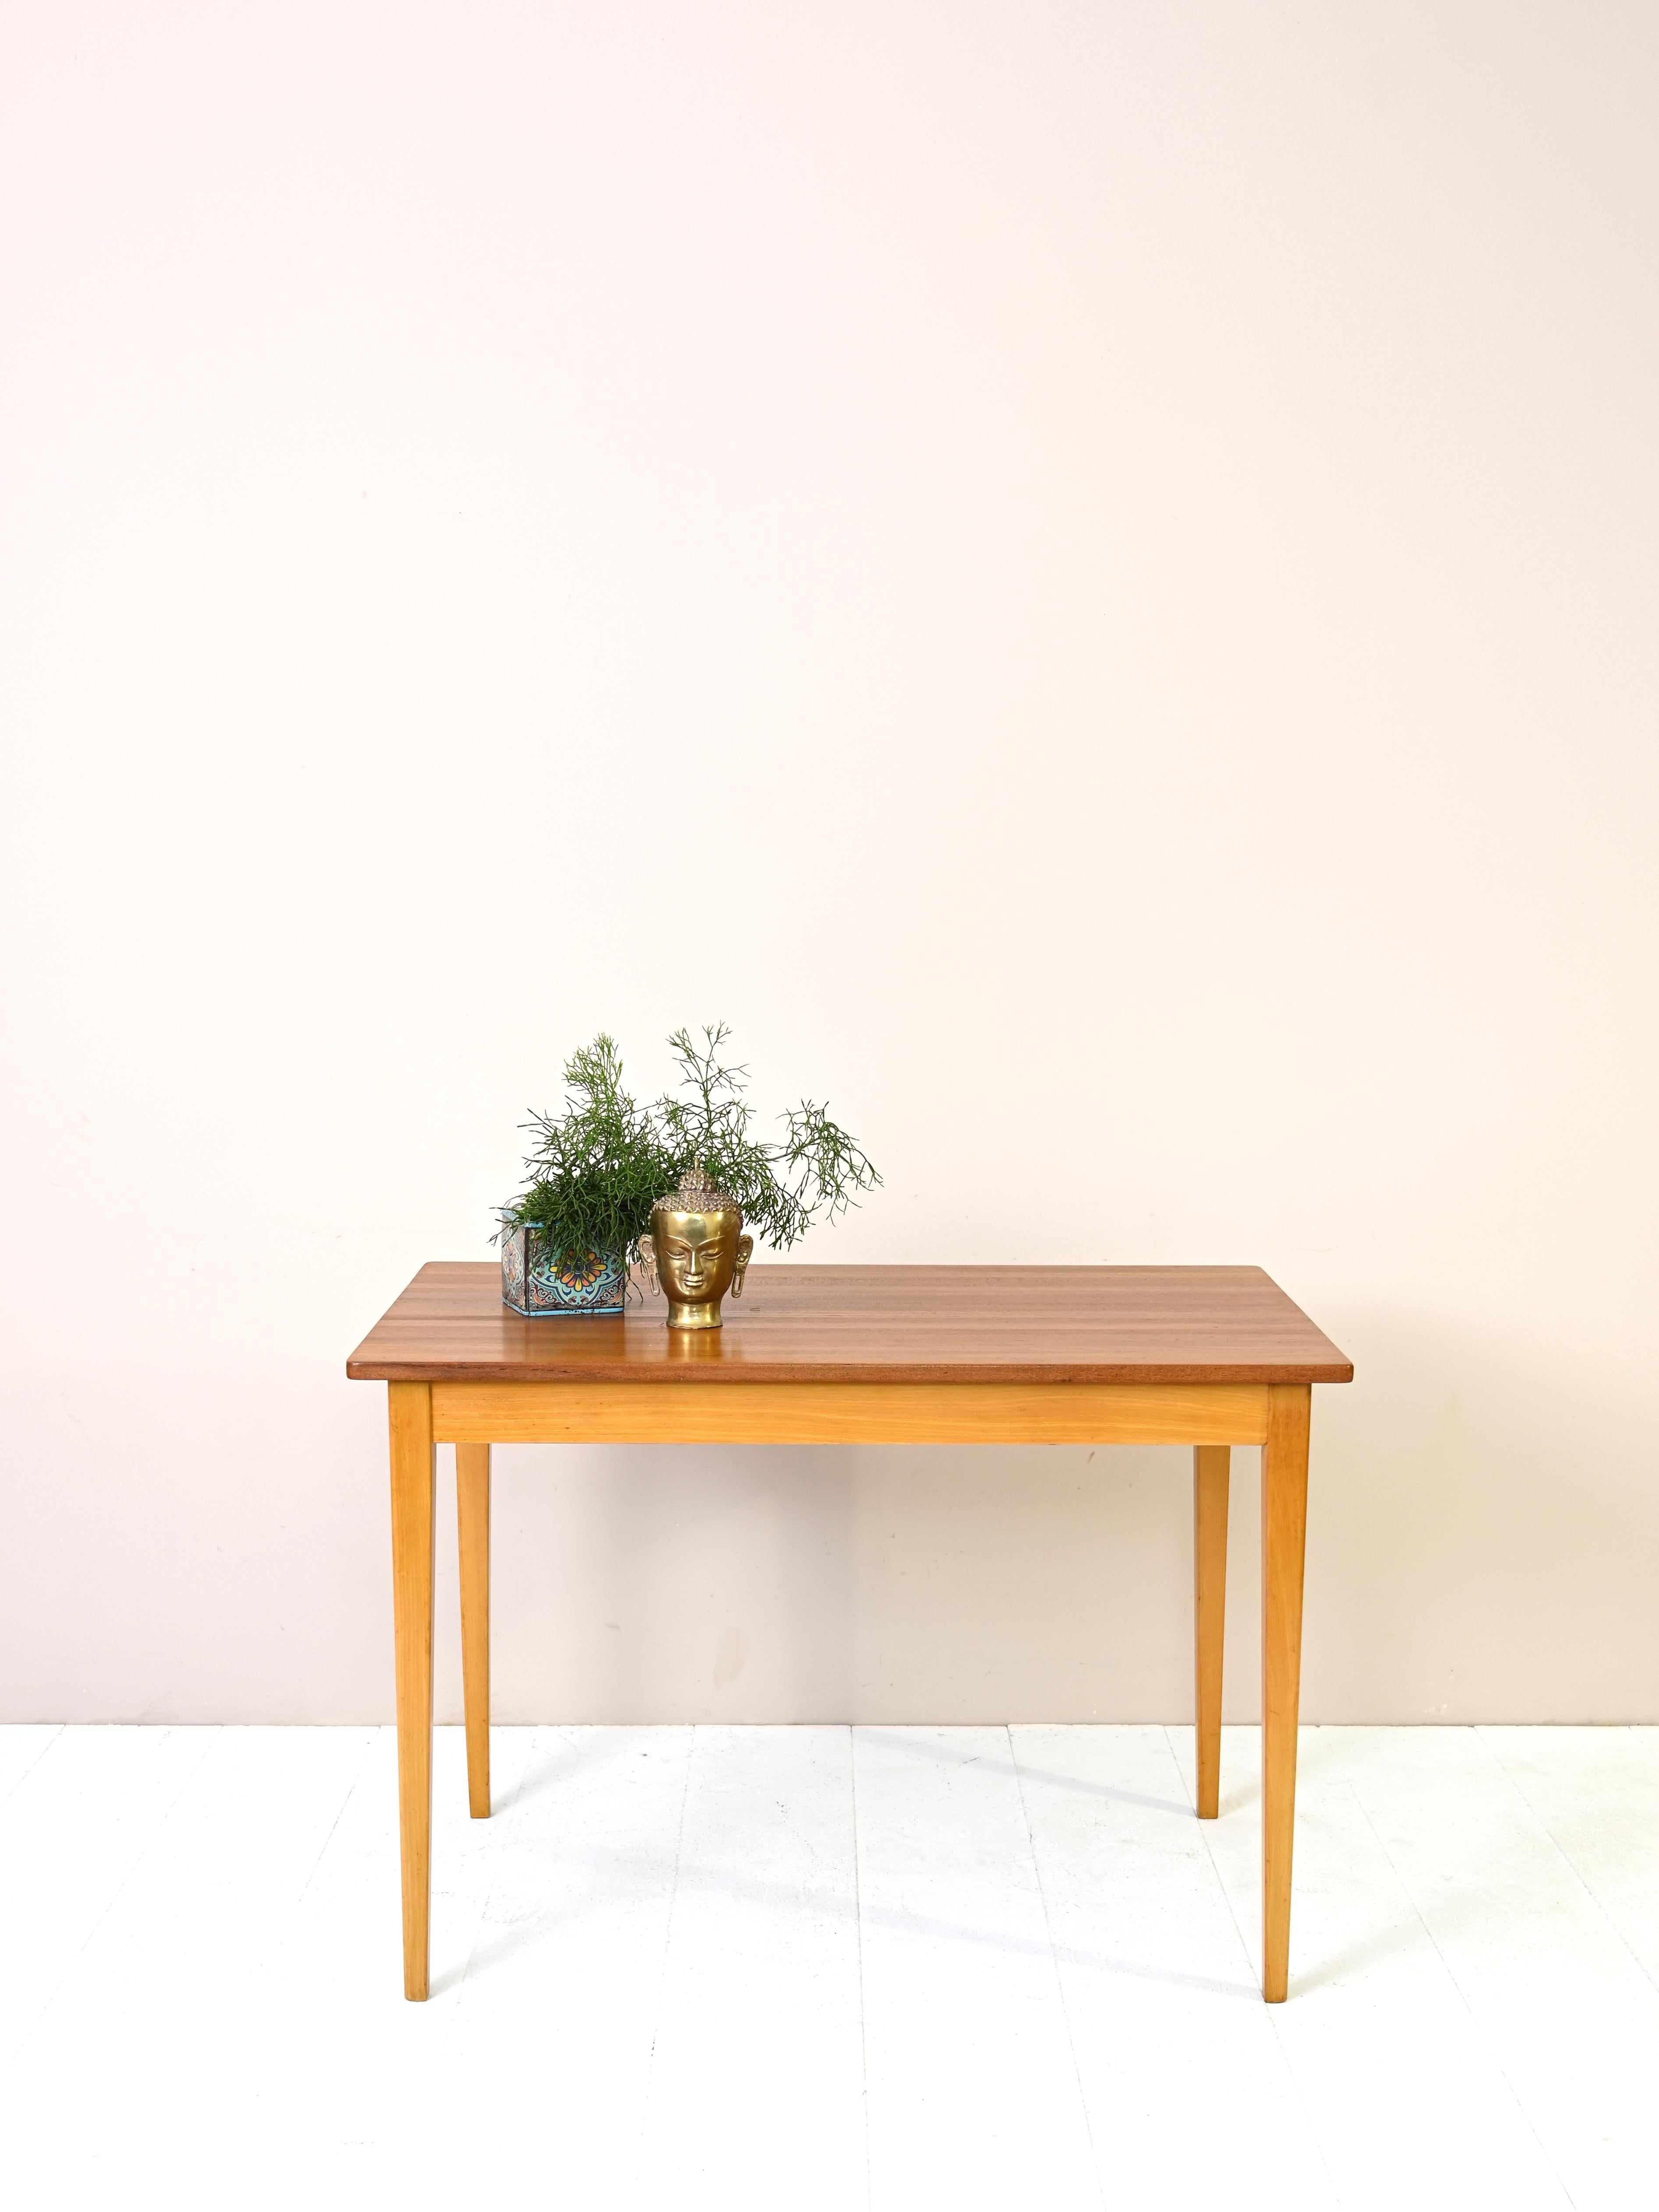 Rectangular dining table, original 1960s.
 
Featuring simple, minimalist shapes this vintage Scandinavian teak wood table is perfect for a small room.

It features long tapered legs, typical of Nordic design.

Good condition. It has been restored to